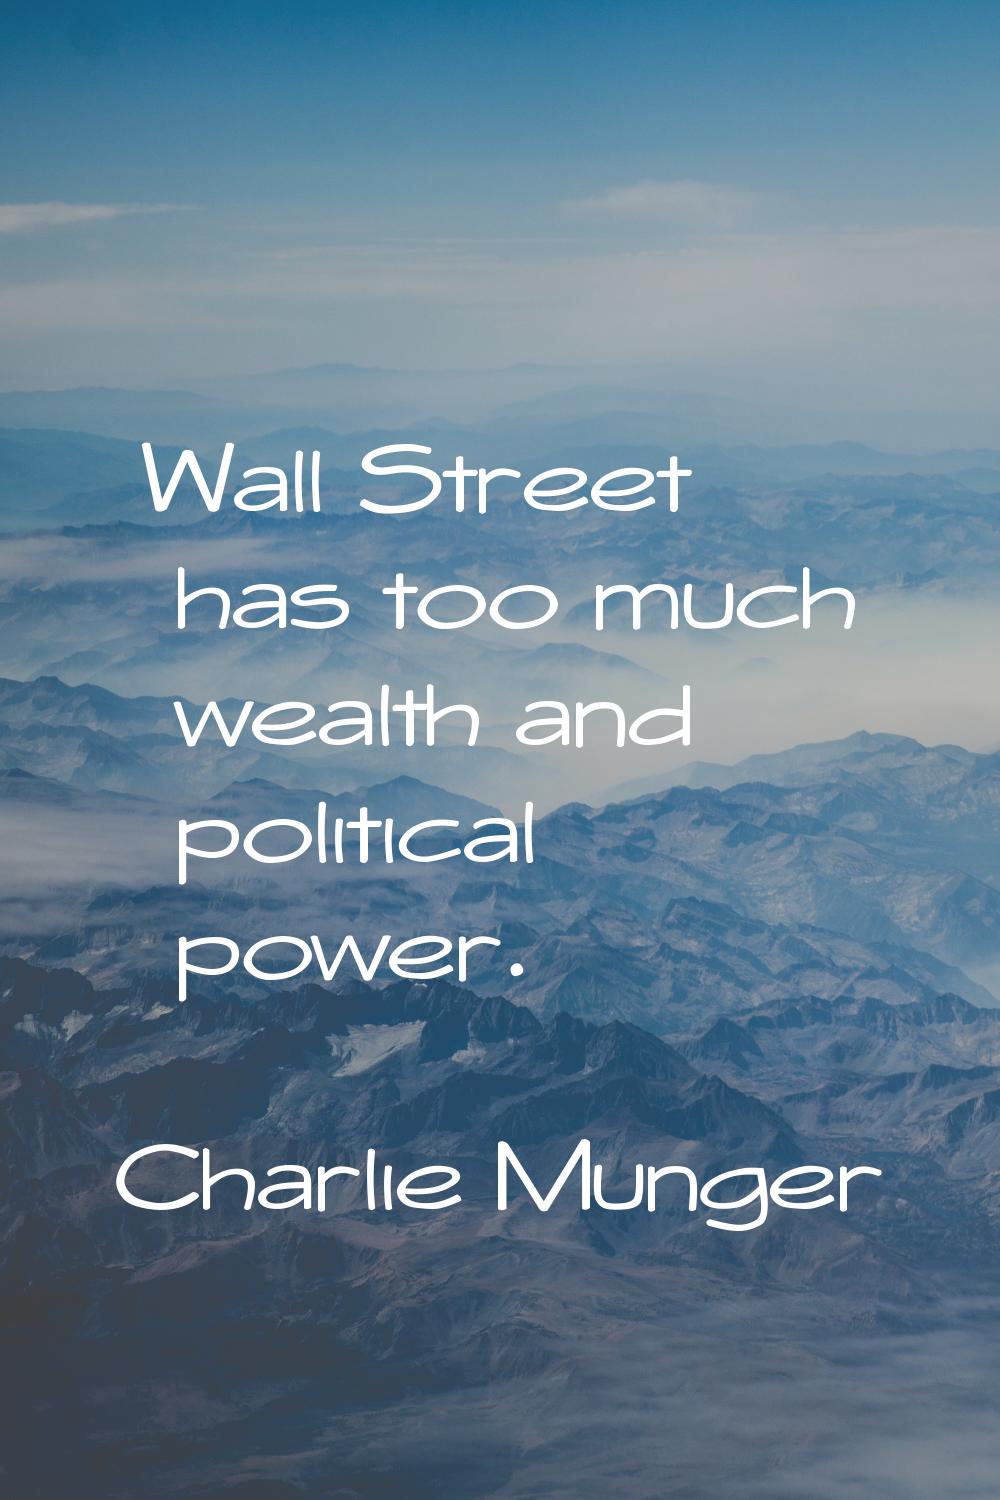 Wall Street has too much wealth and political power.